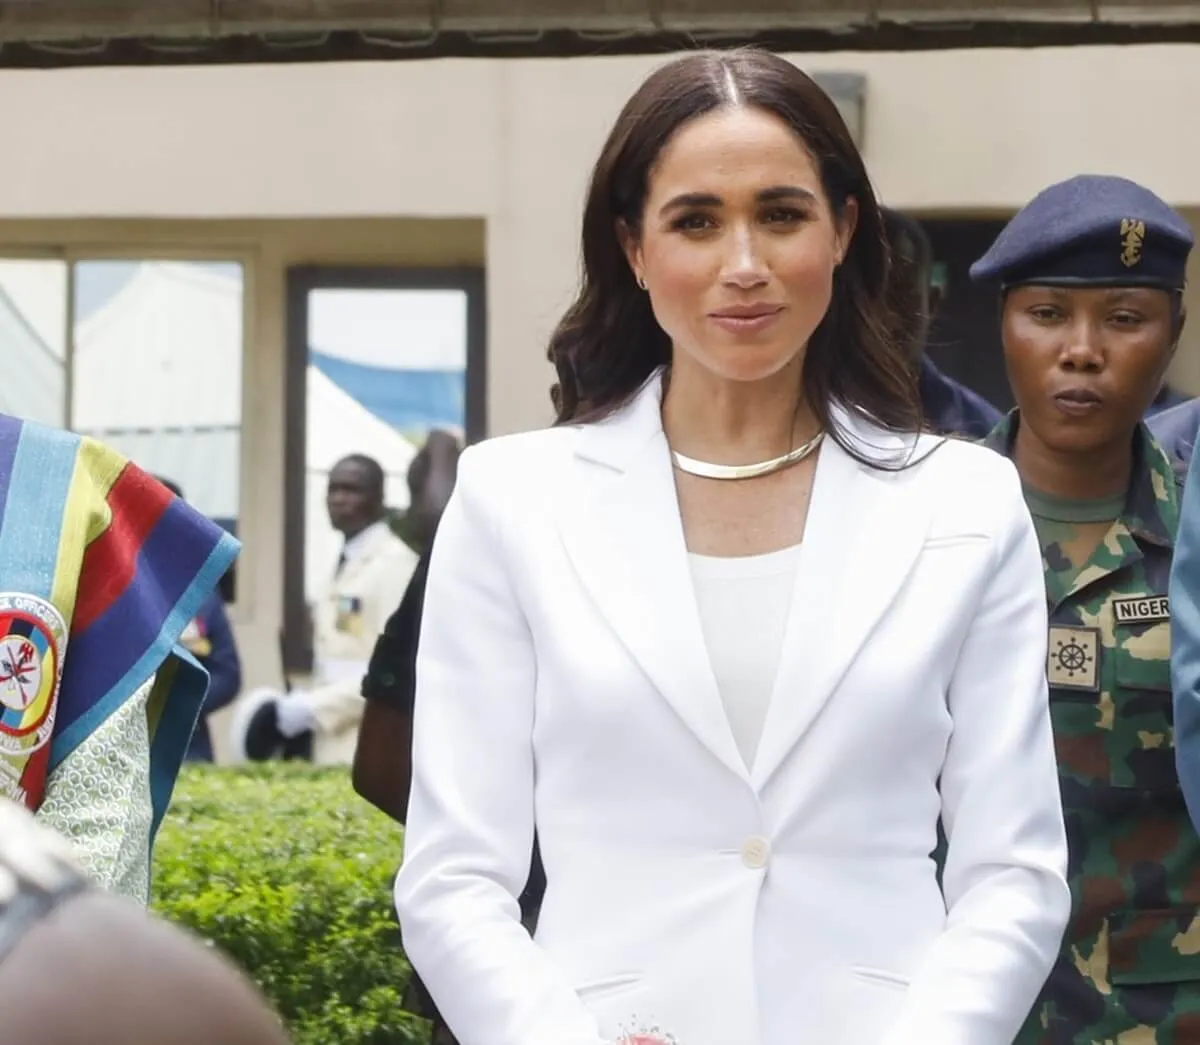 Meghan Markle at the Defence Headquarters in Abuja, Nigeria